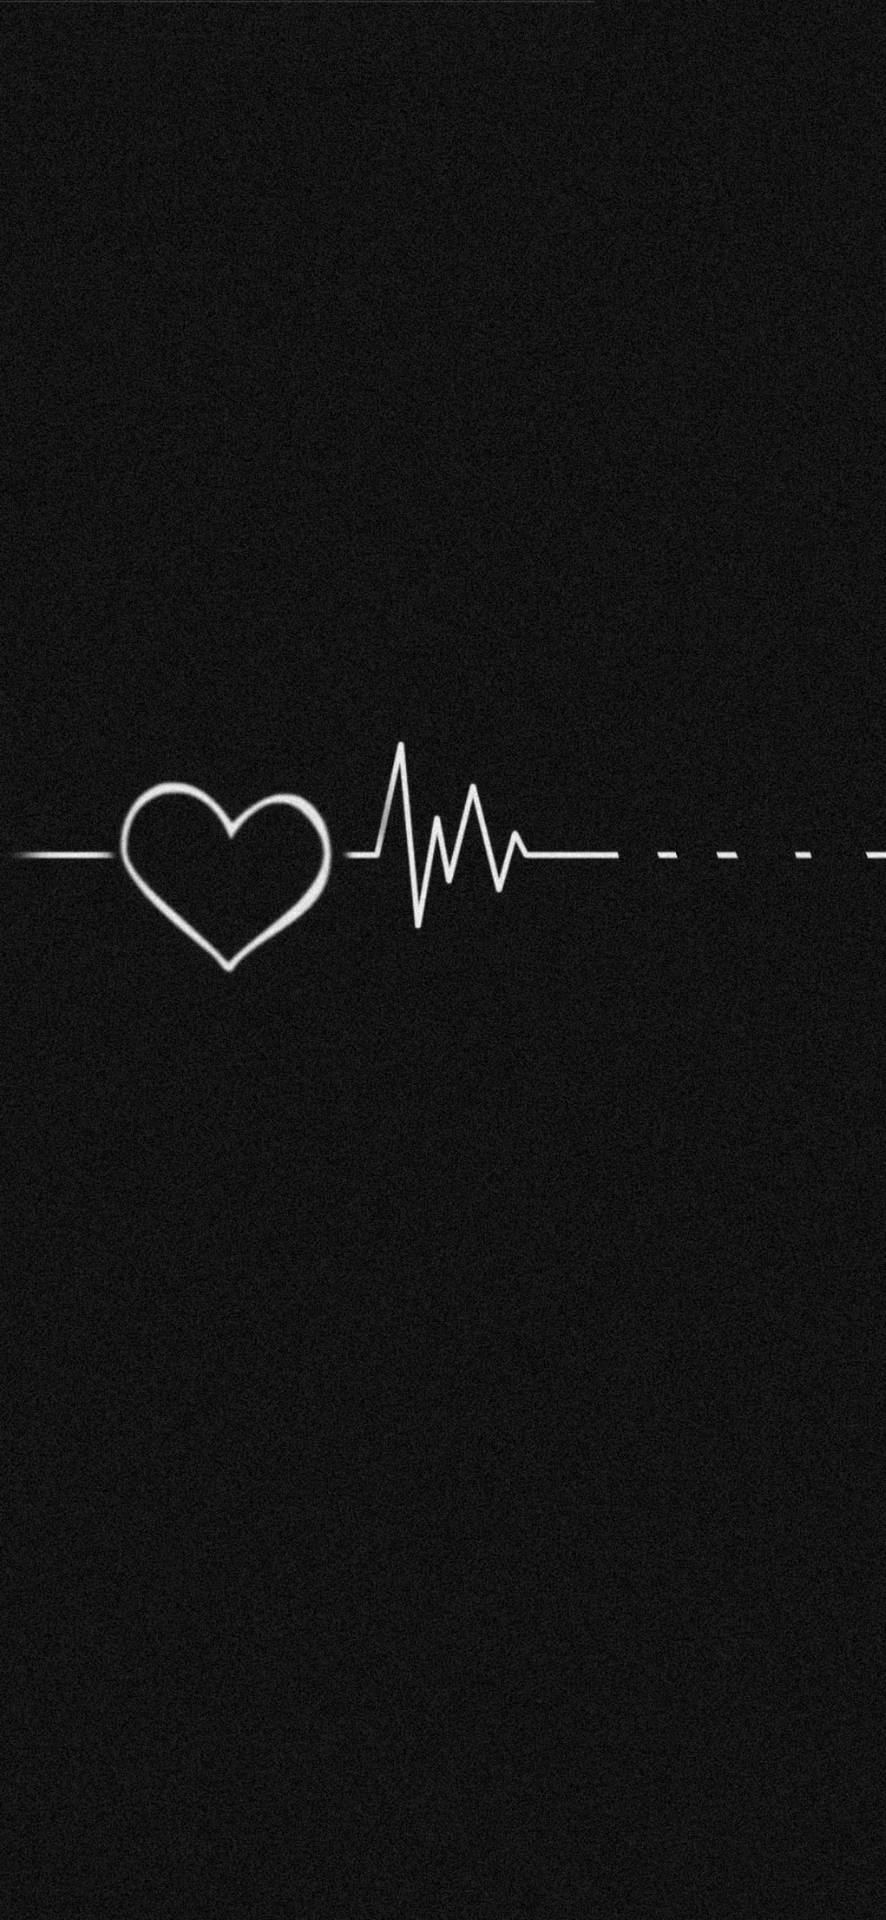 Download Black Heart Aesthetic With Pulse Rate Wallpaper 